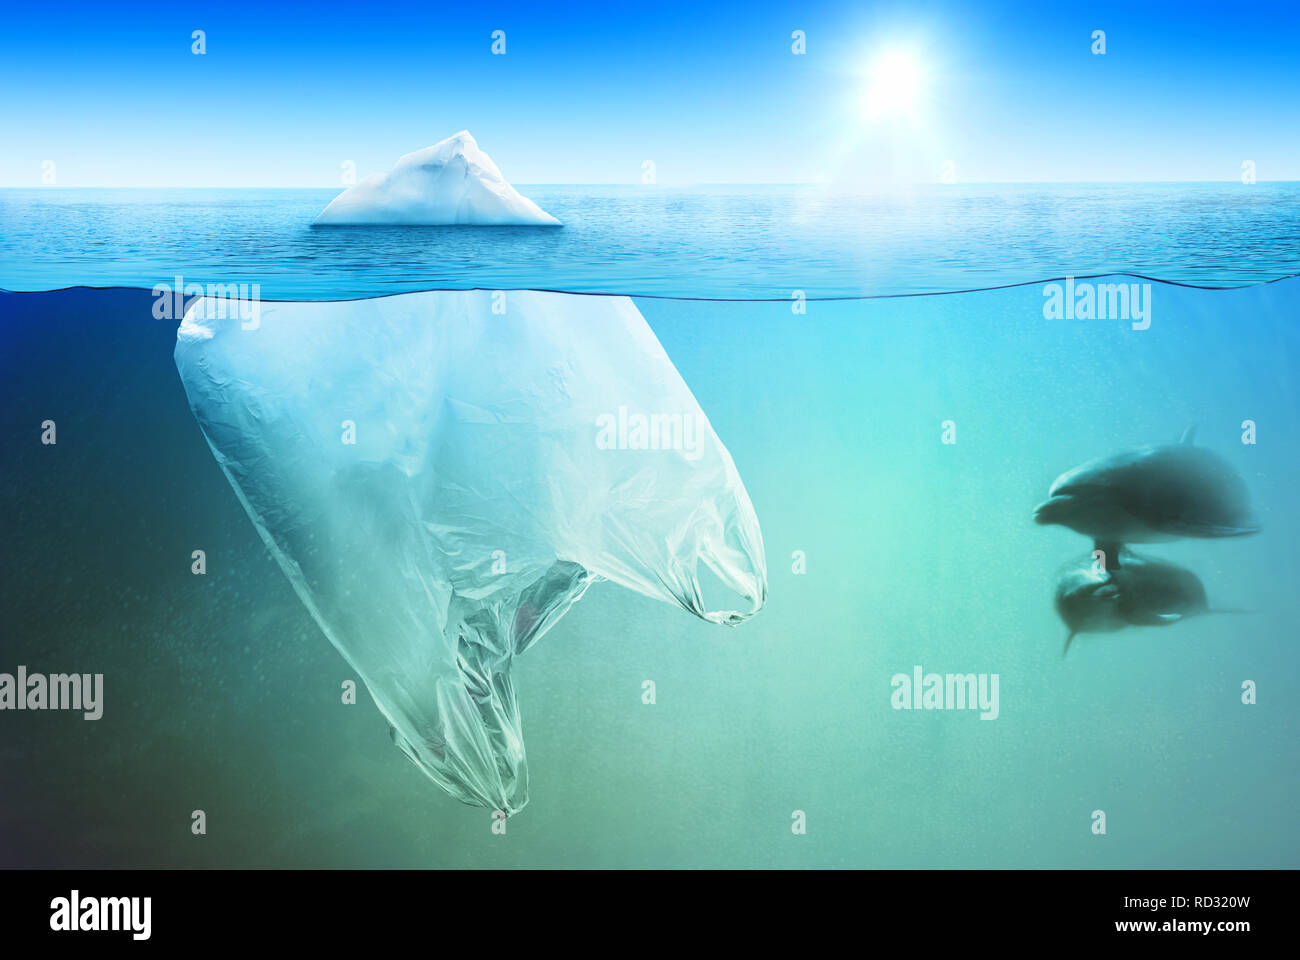 Two dolphins swimming near huge plastic bag in the open sea Stock Photo